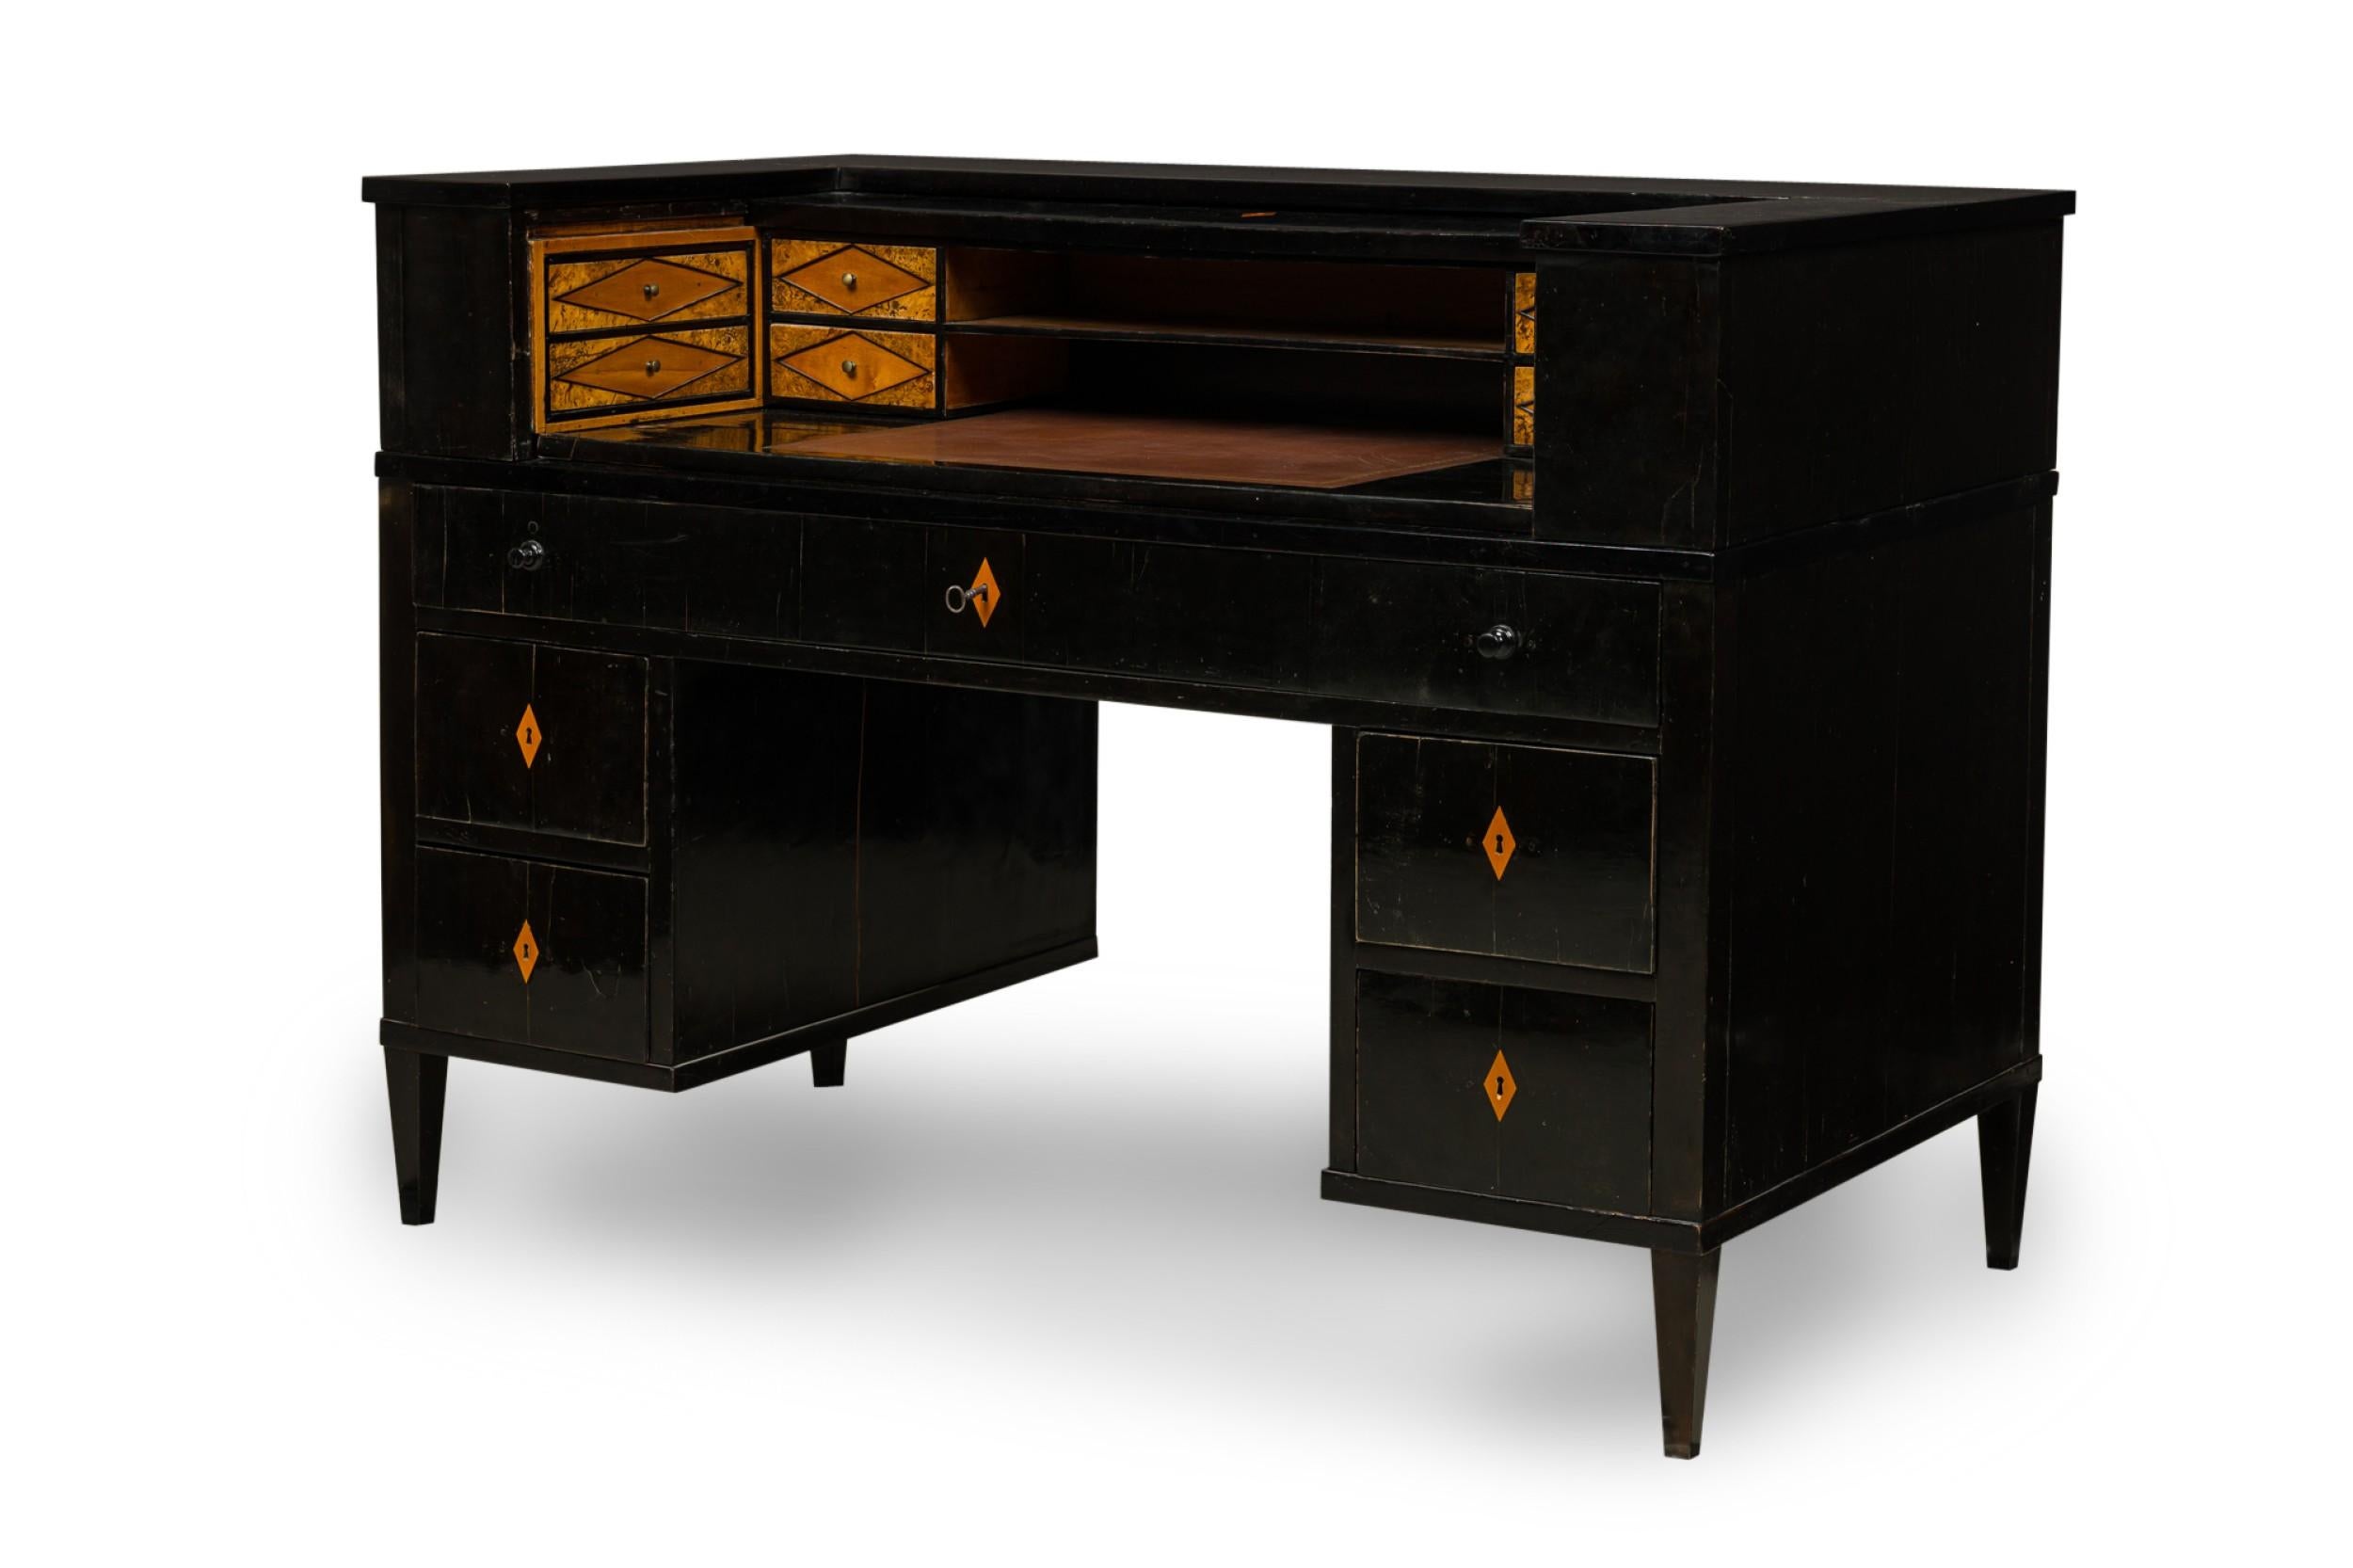 Art Deco ebonized pearwood writing desk with a tambour roll top upper section concealing four pairs of interior drawers with diamond pattern inlaid burl wood fronts surrounding a brown leather writing surface with a gilt embossed edge above a single